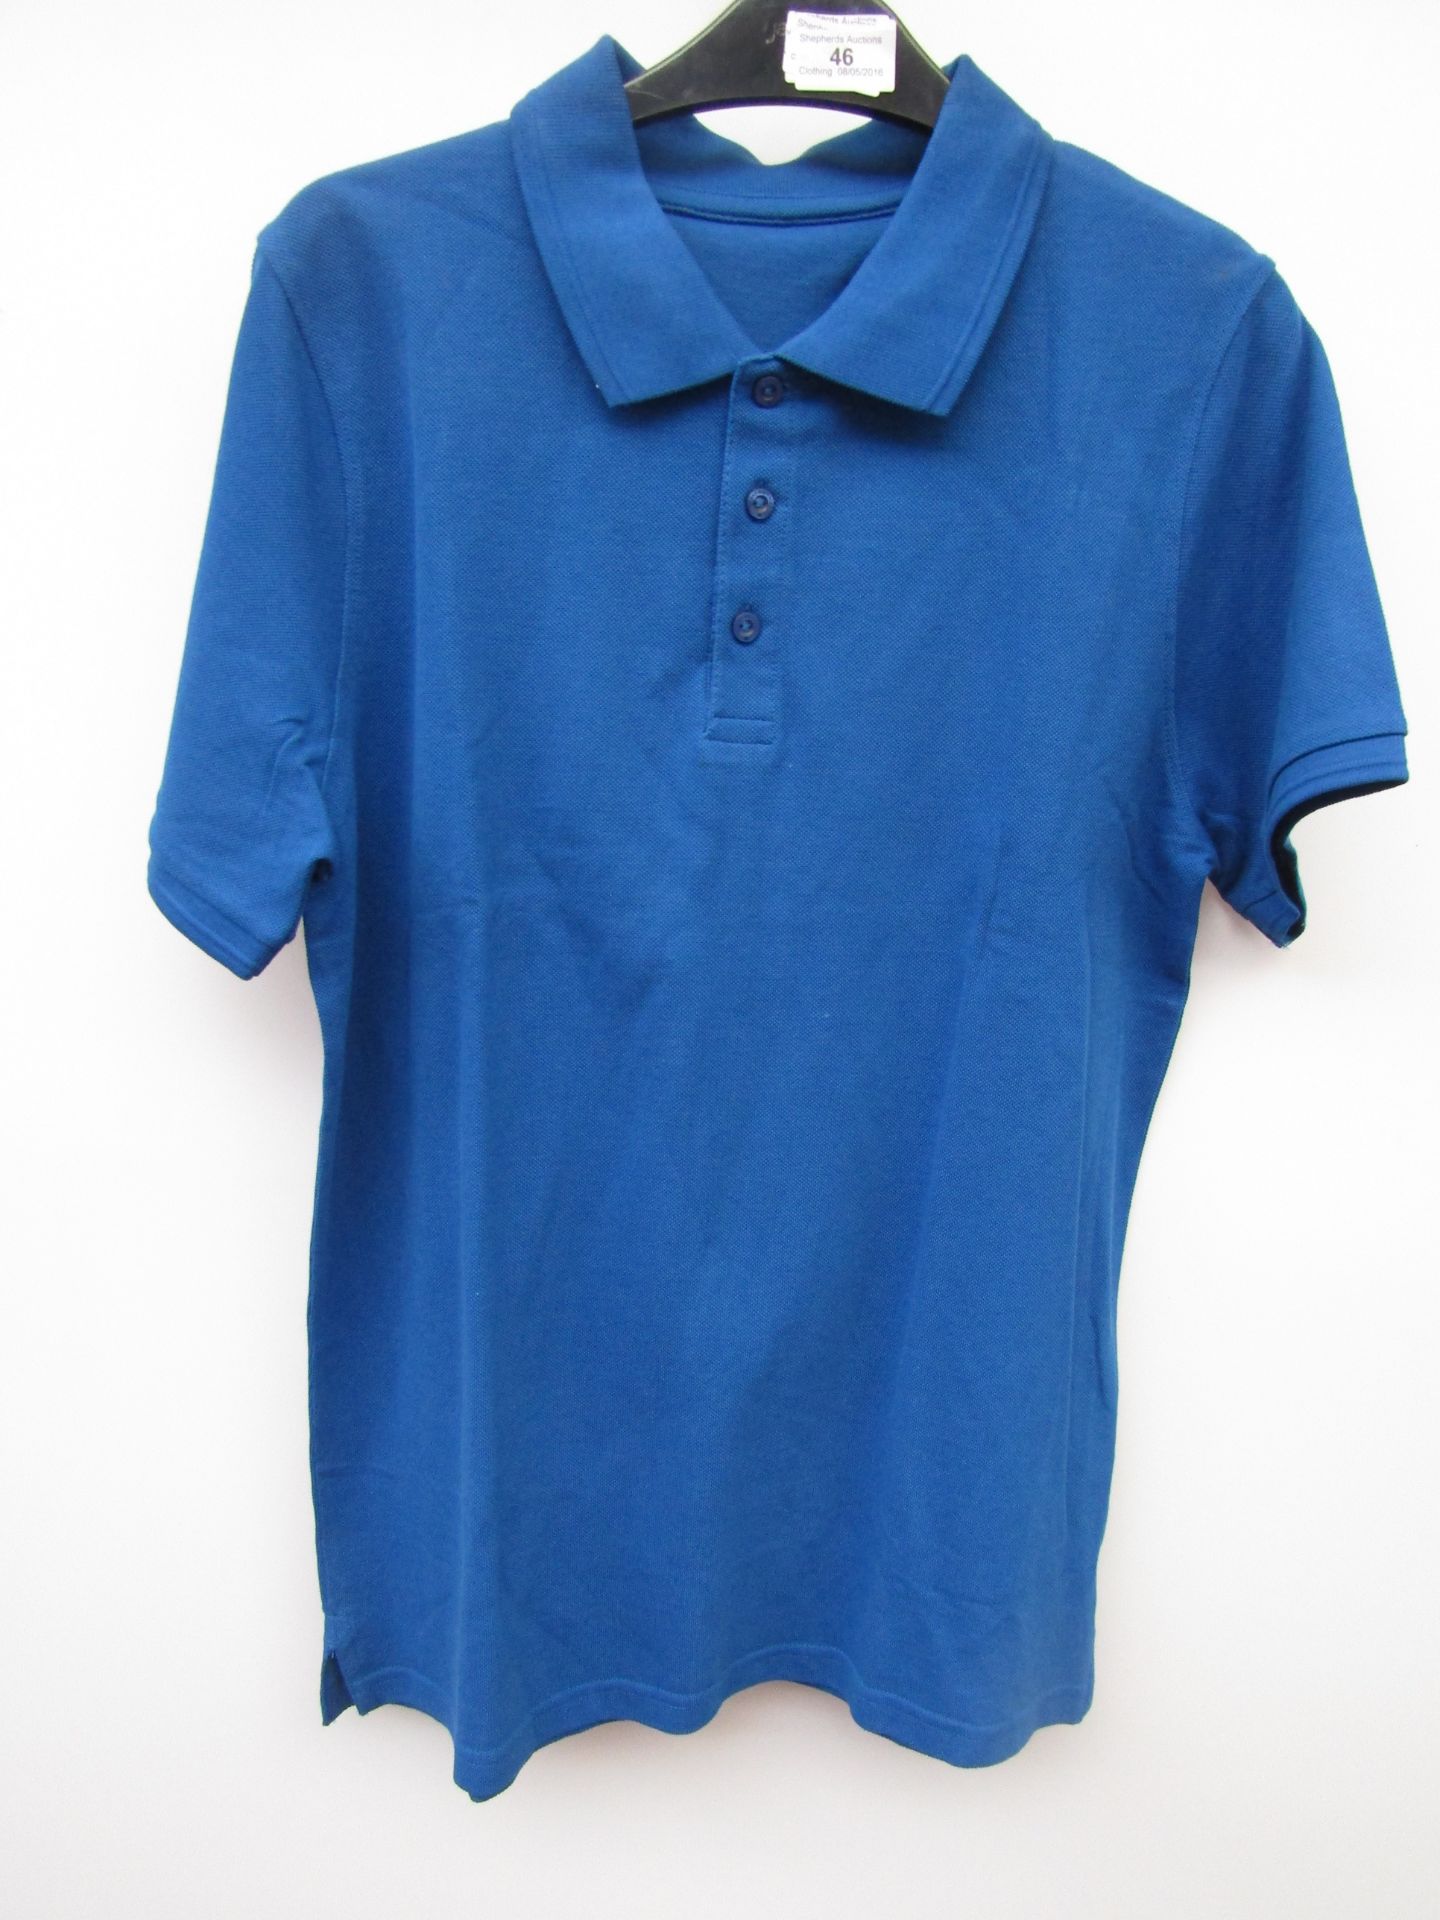 M&S Collection Boys Polo-Shirt age 14/15 years, please read Lot Zero Before Bidding